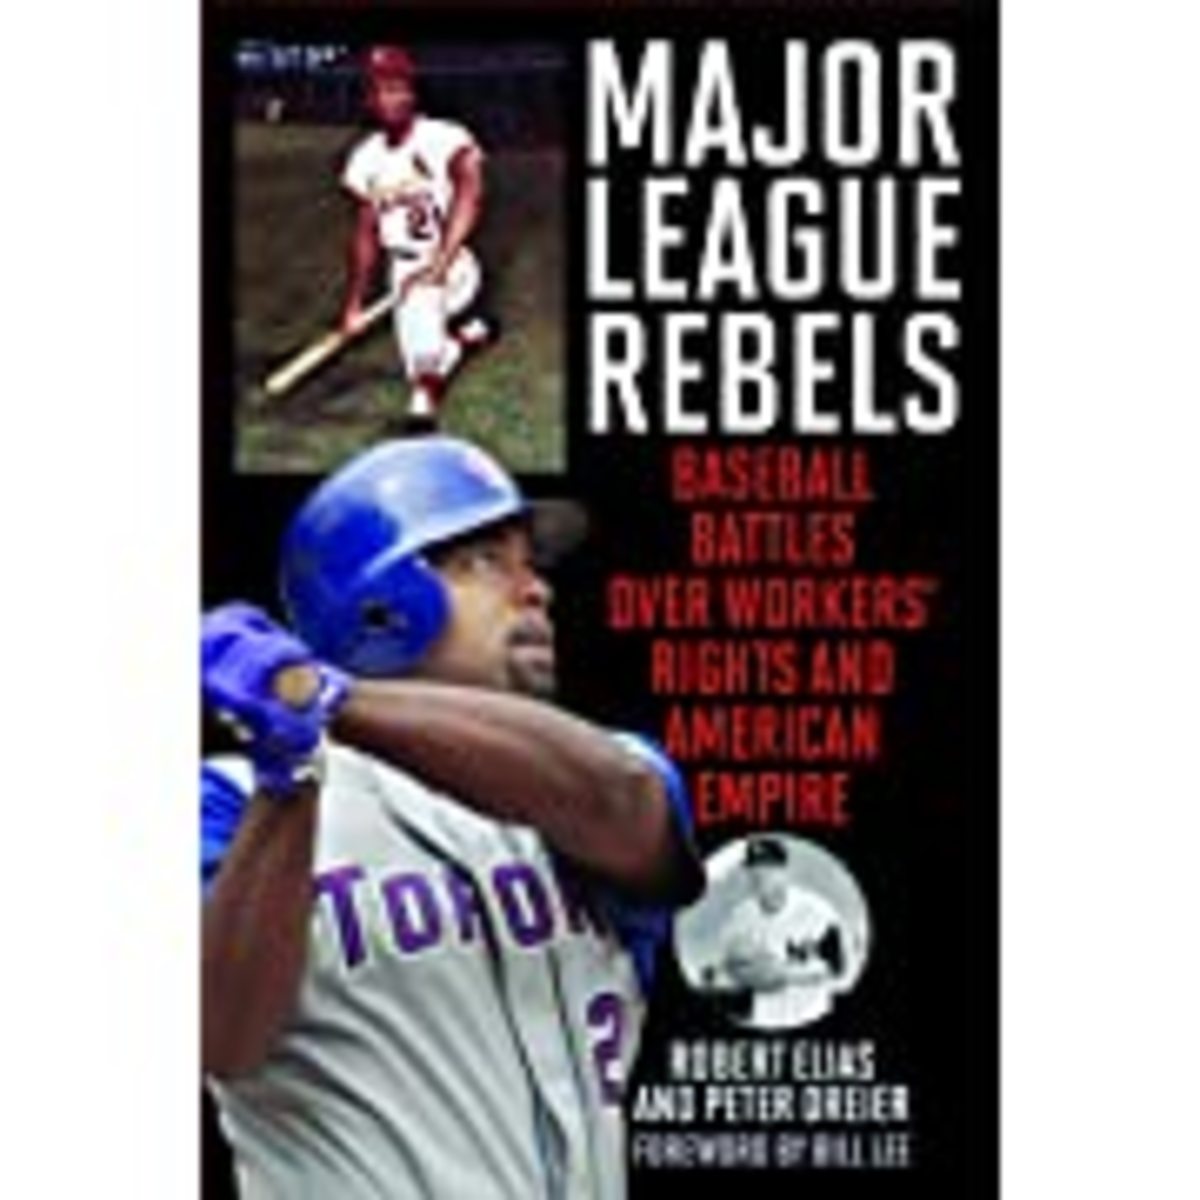 Major League Rebels: Baseball Battles Over Workers Rights and American Empire.